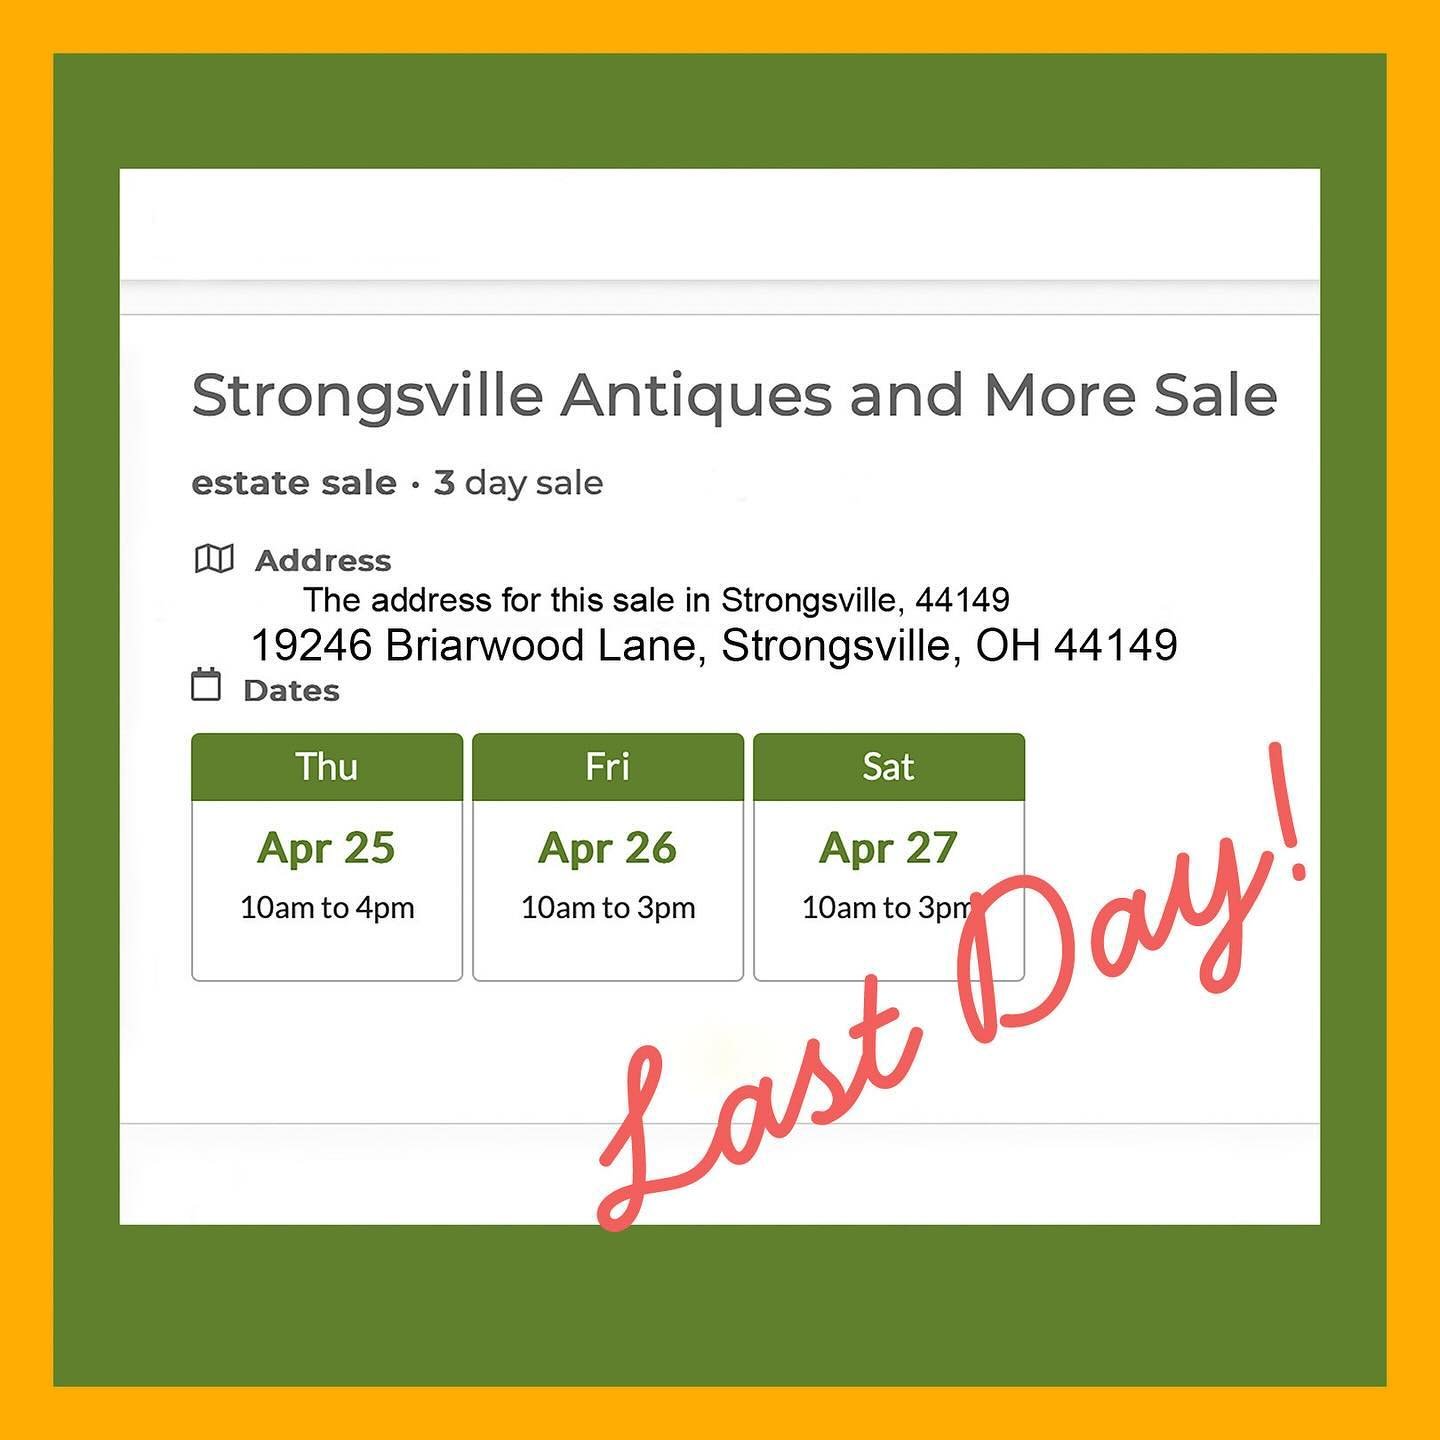 ENDS TODAY Saturday 4/27/24. All Things For You&rsquo;s estate sale runs 4/25-4/27/24 in Strongsville 44149. Visit this fun All Things For You estate sale for some wonderful treasures. 
Check out the web address below for more details and photos on t